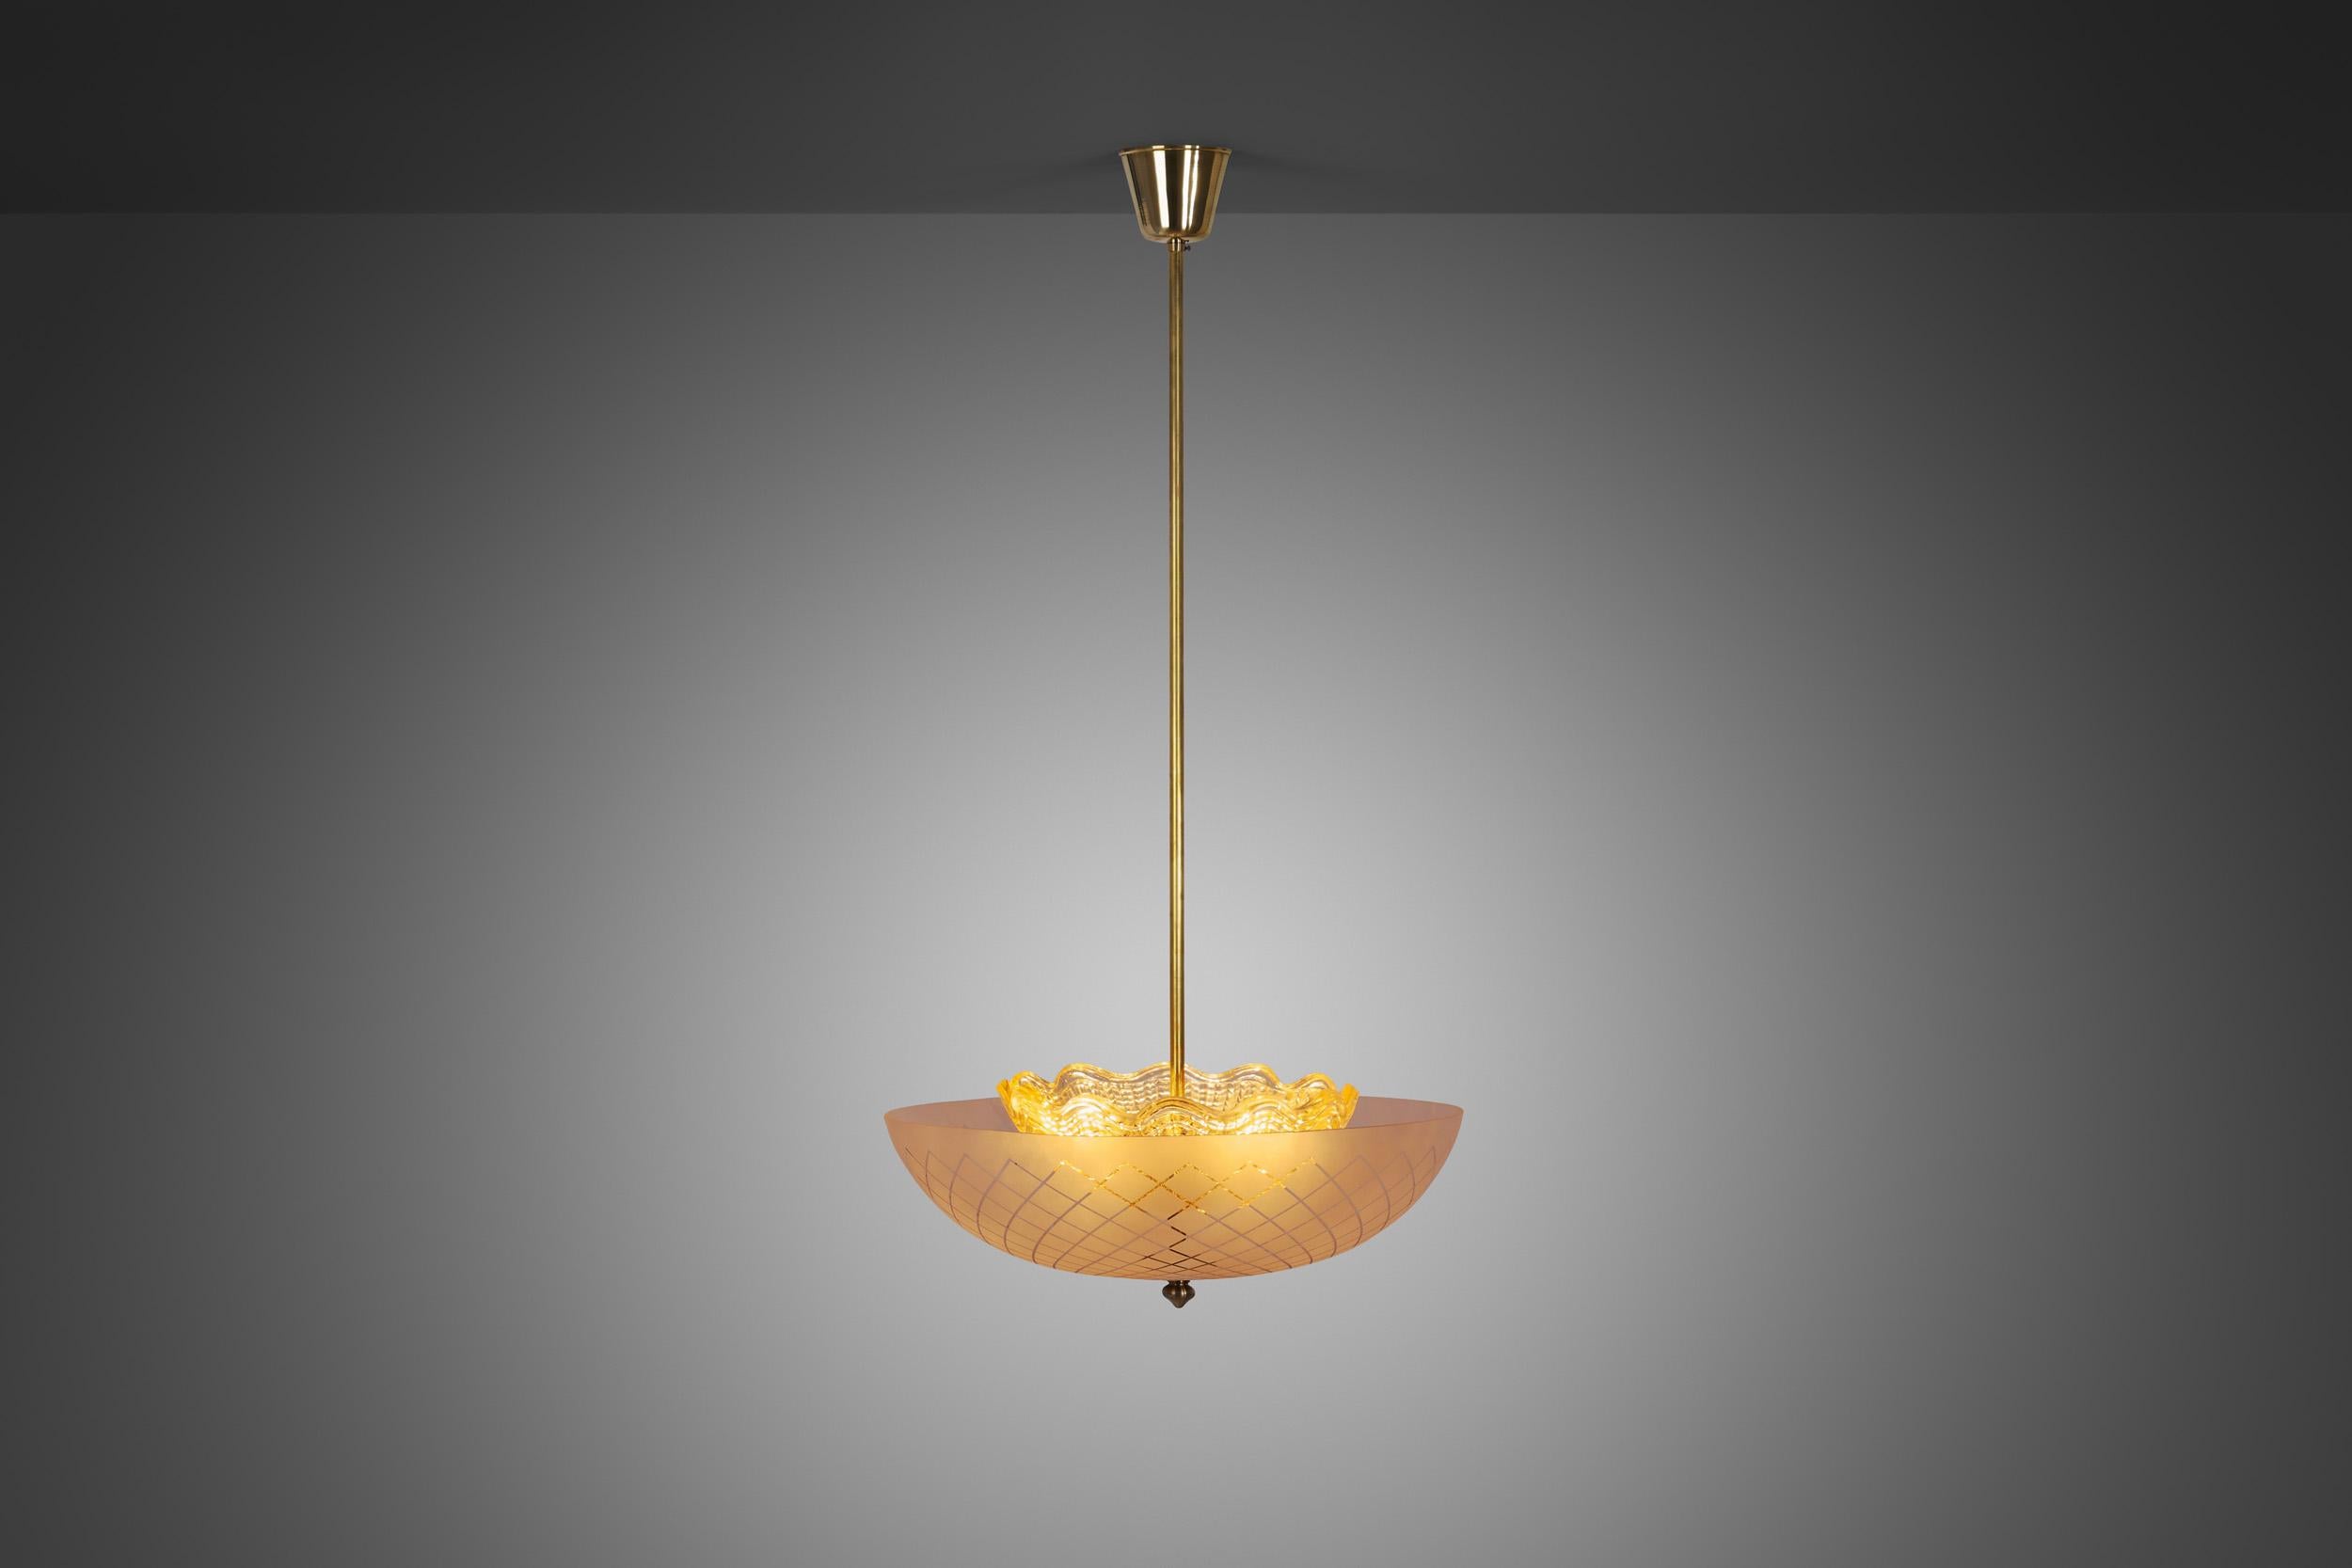 Brass Swedish Modern Glass Ceiling Lamp by Orrefors, Sweden 1930s For Sale